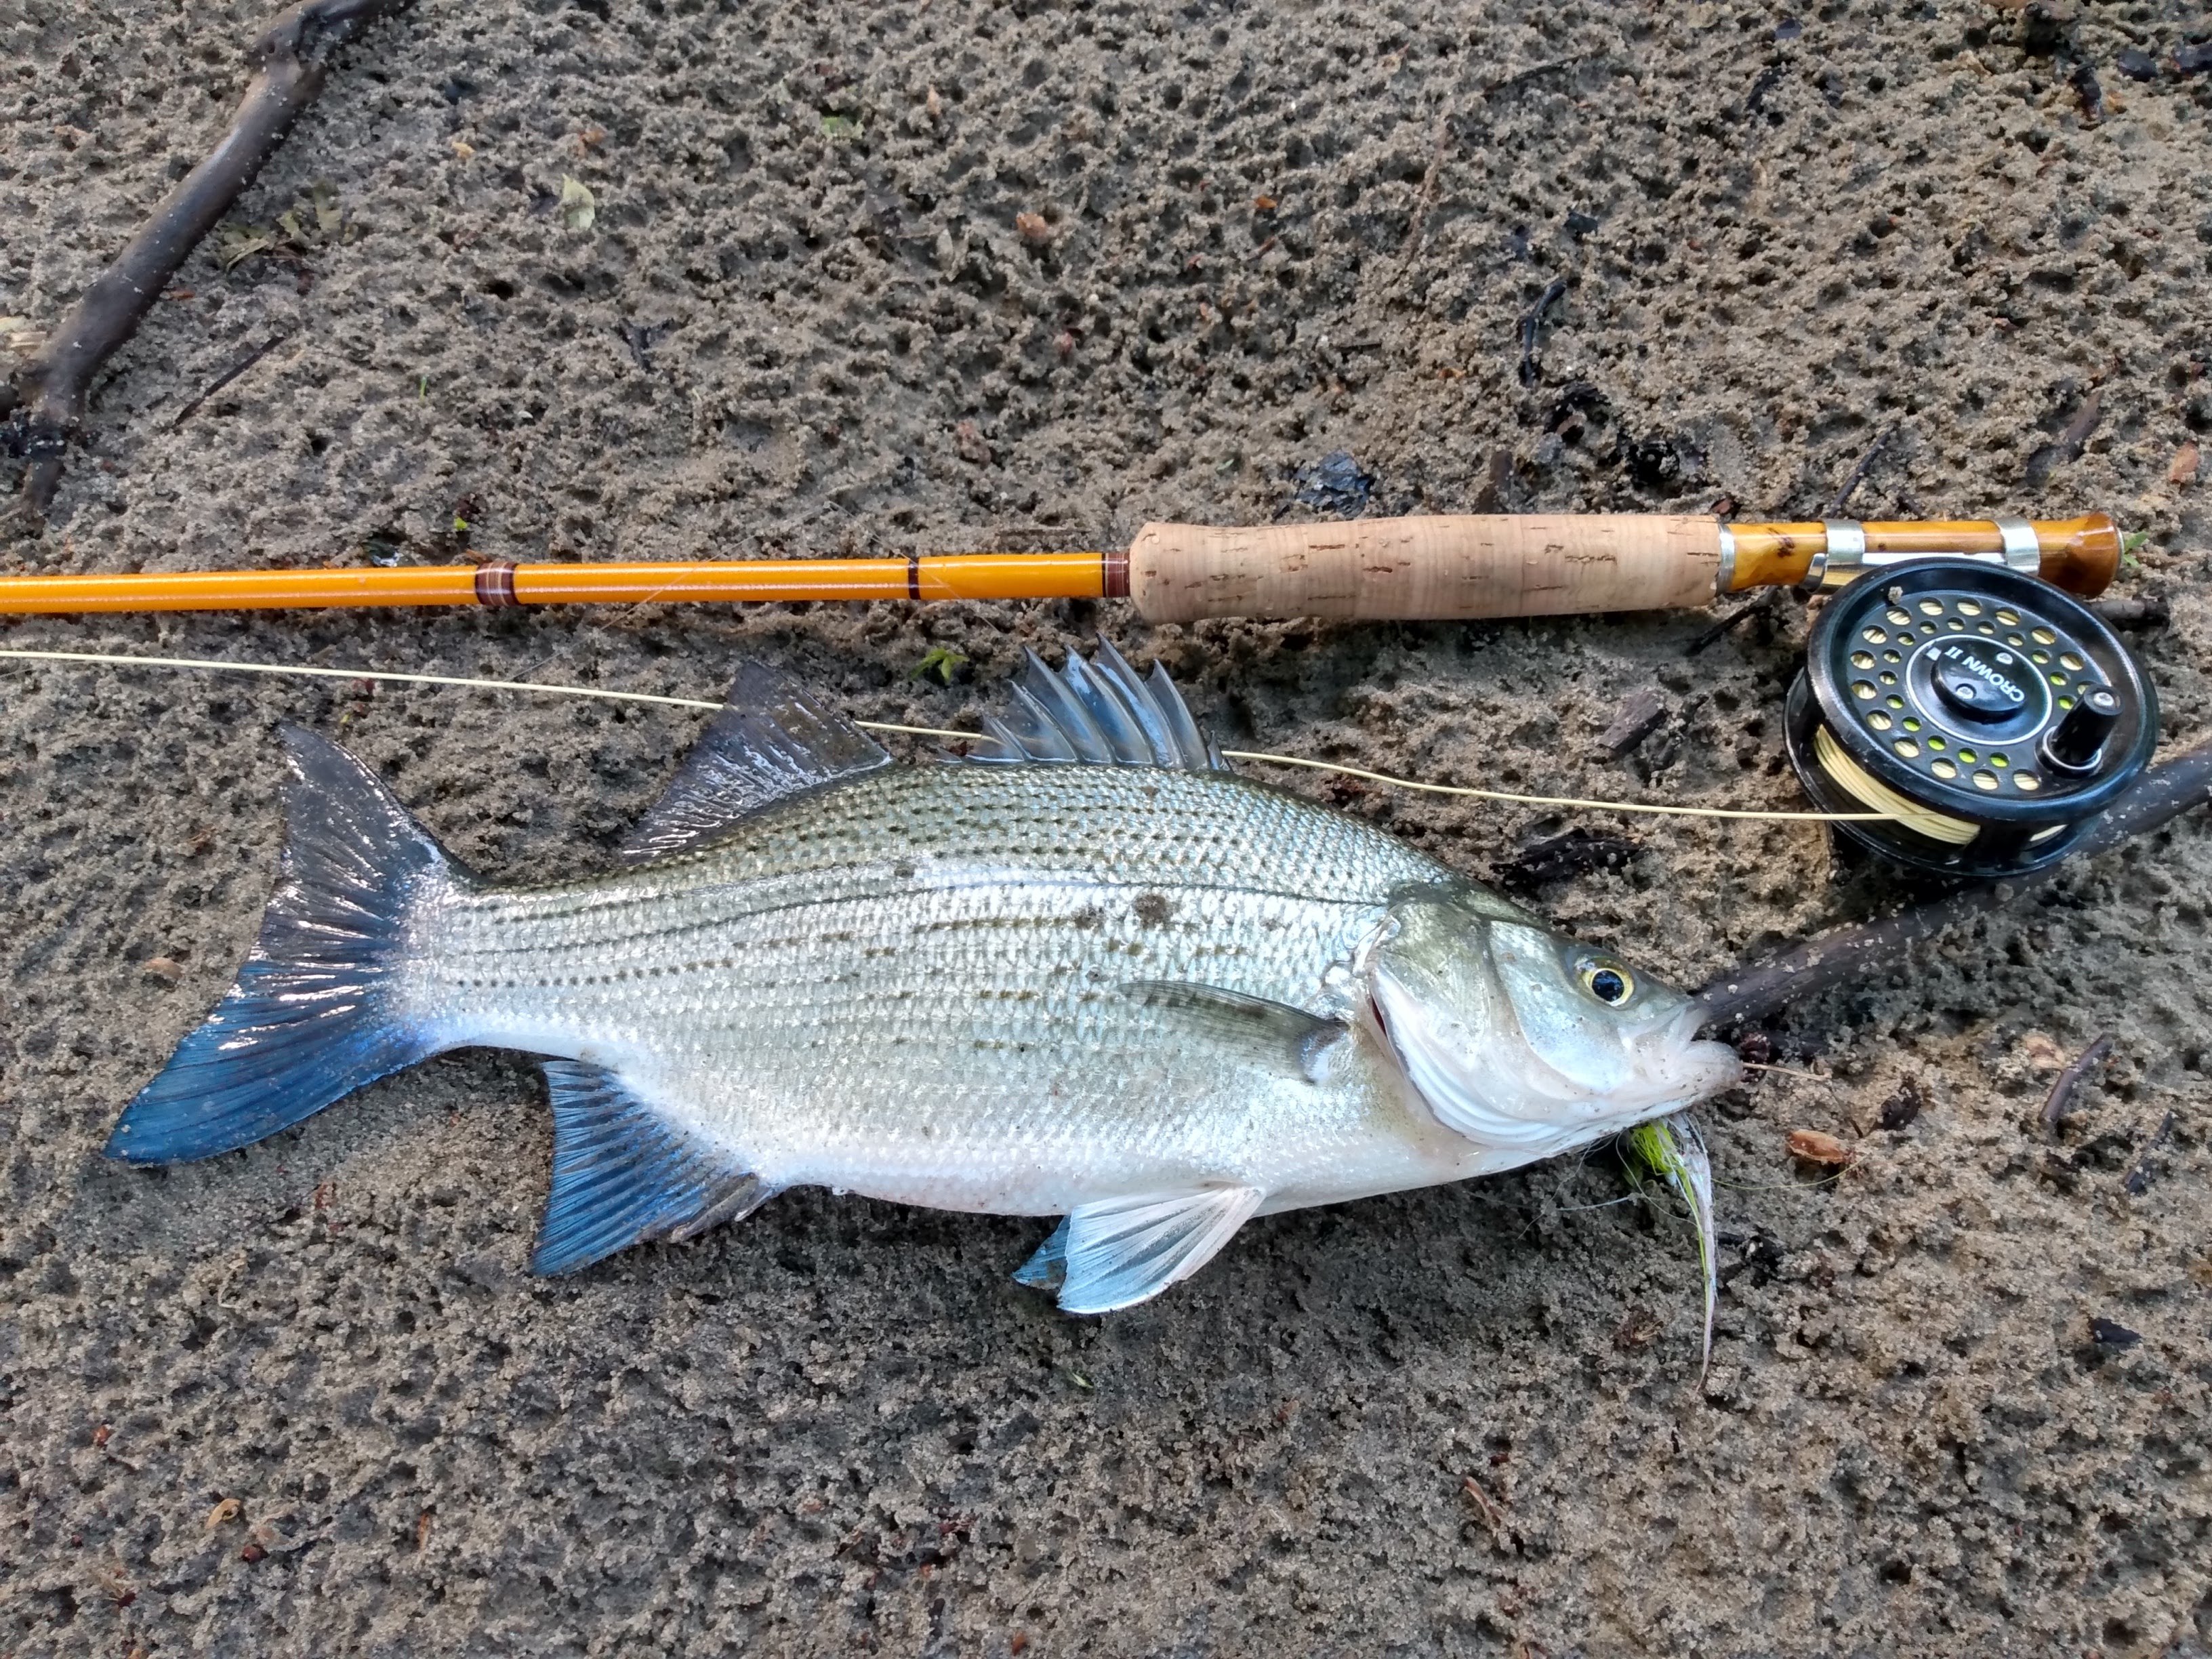 The Ultimate Lure For White Bass 